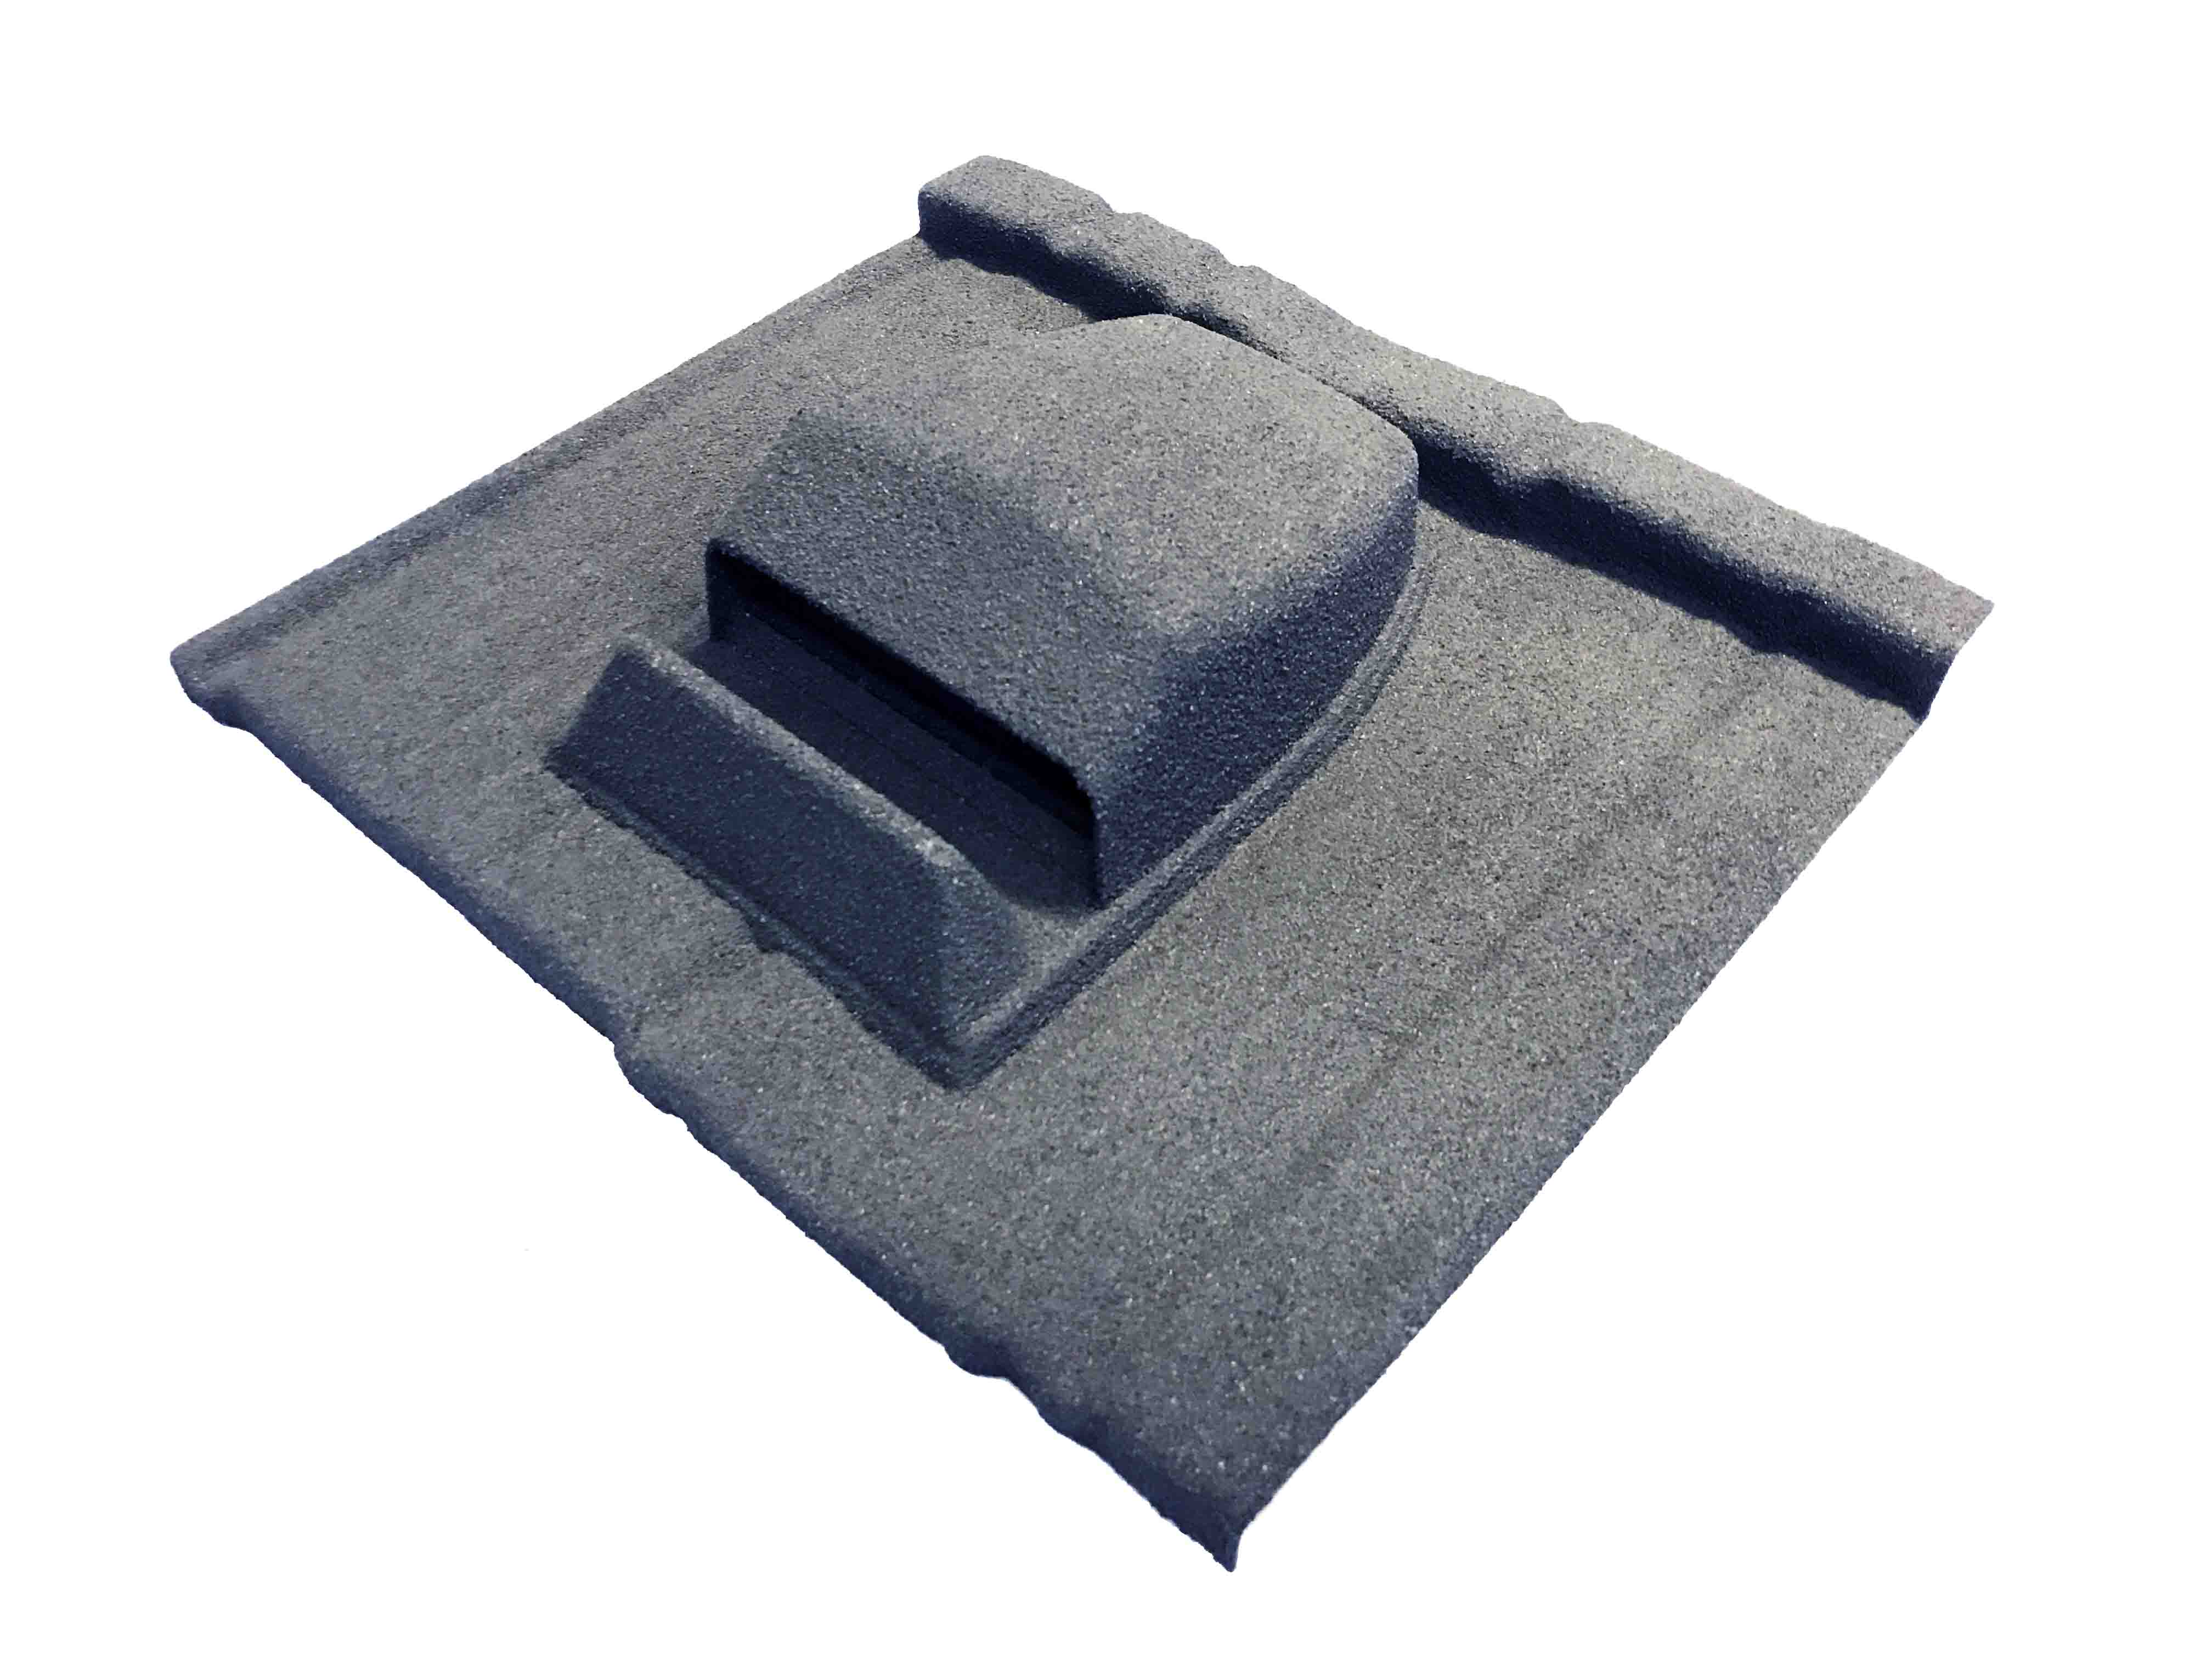 Metrotile Lightweight Roofing Vent LG75 Charcoal